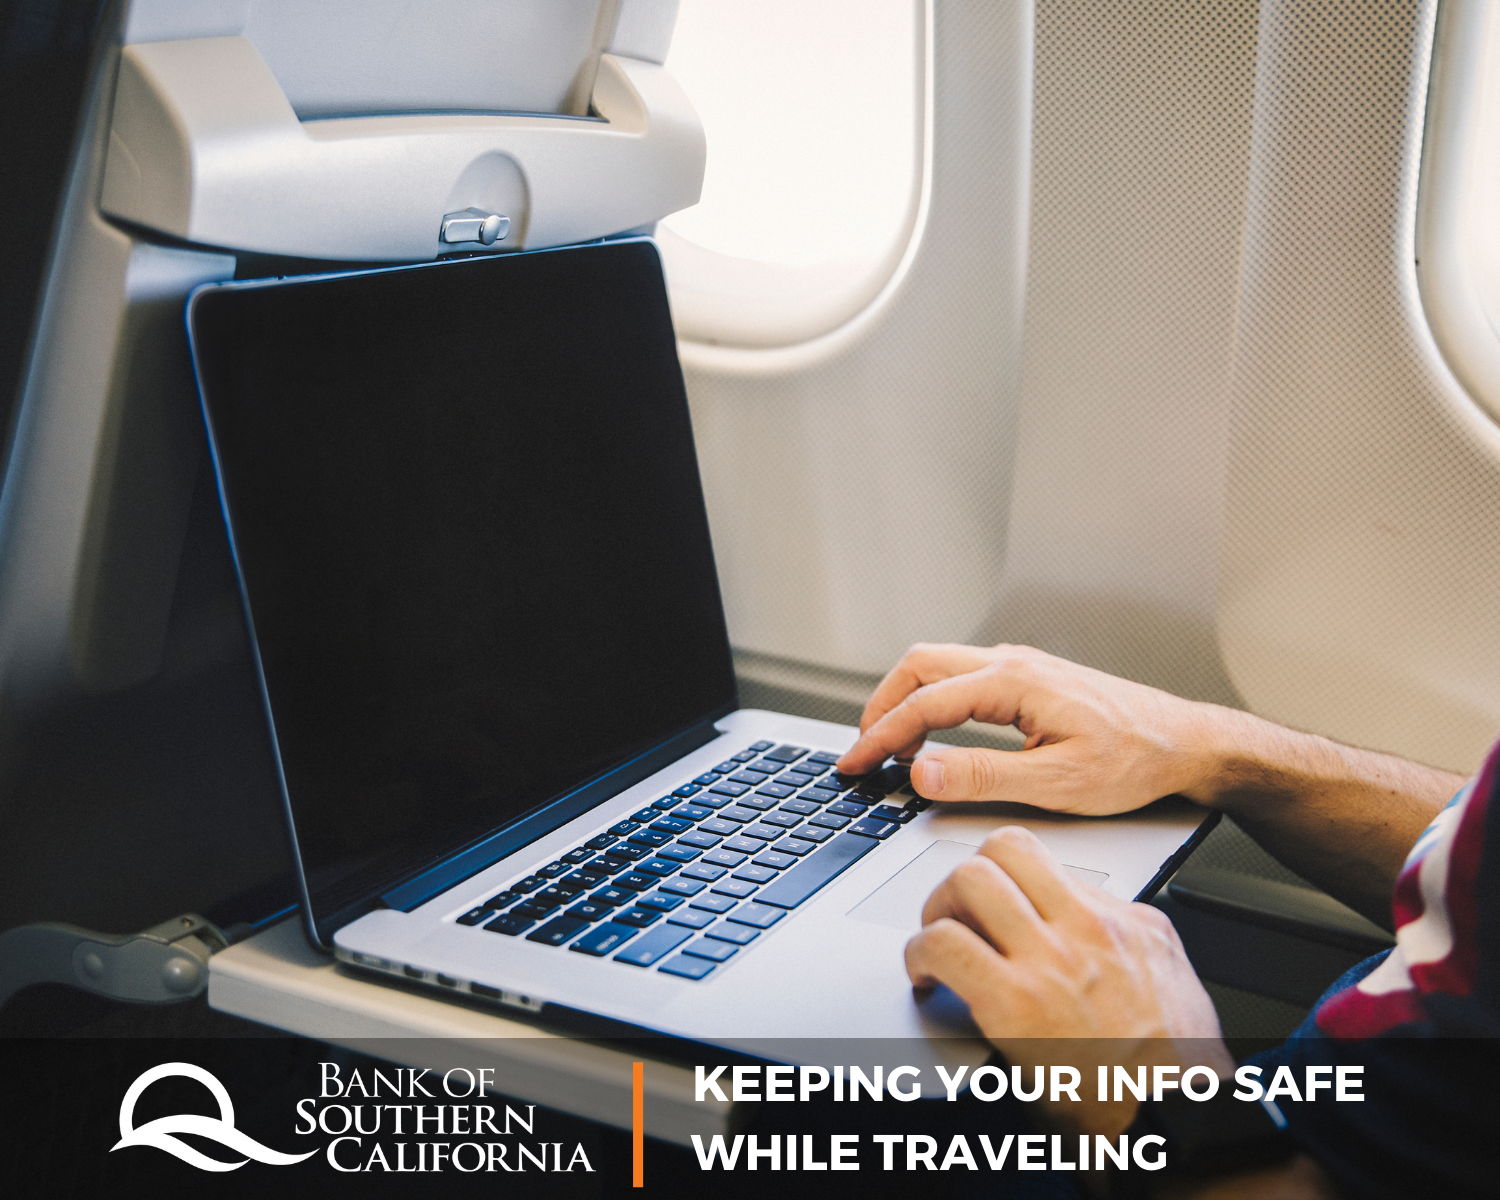 Protect your information when traveling